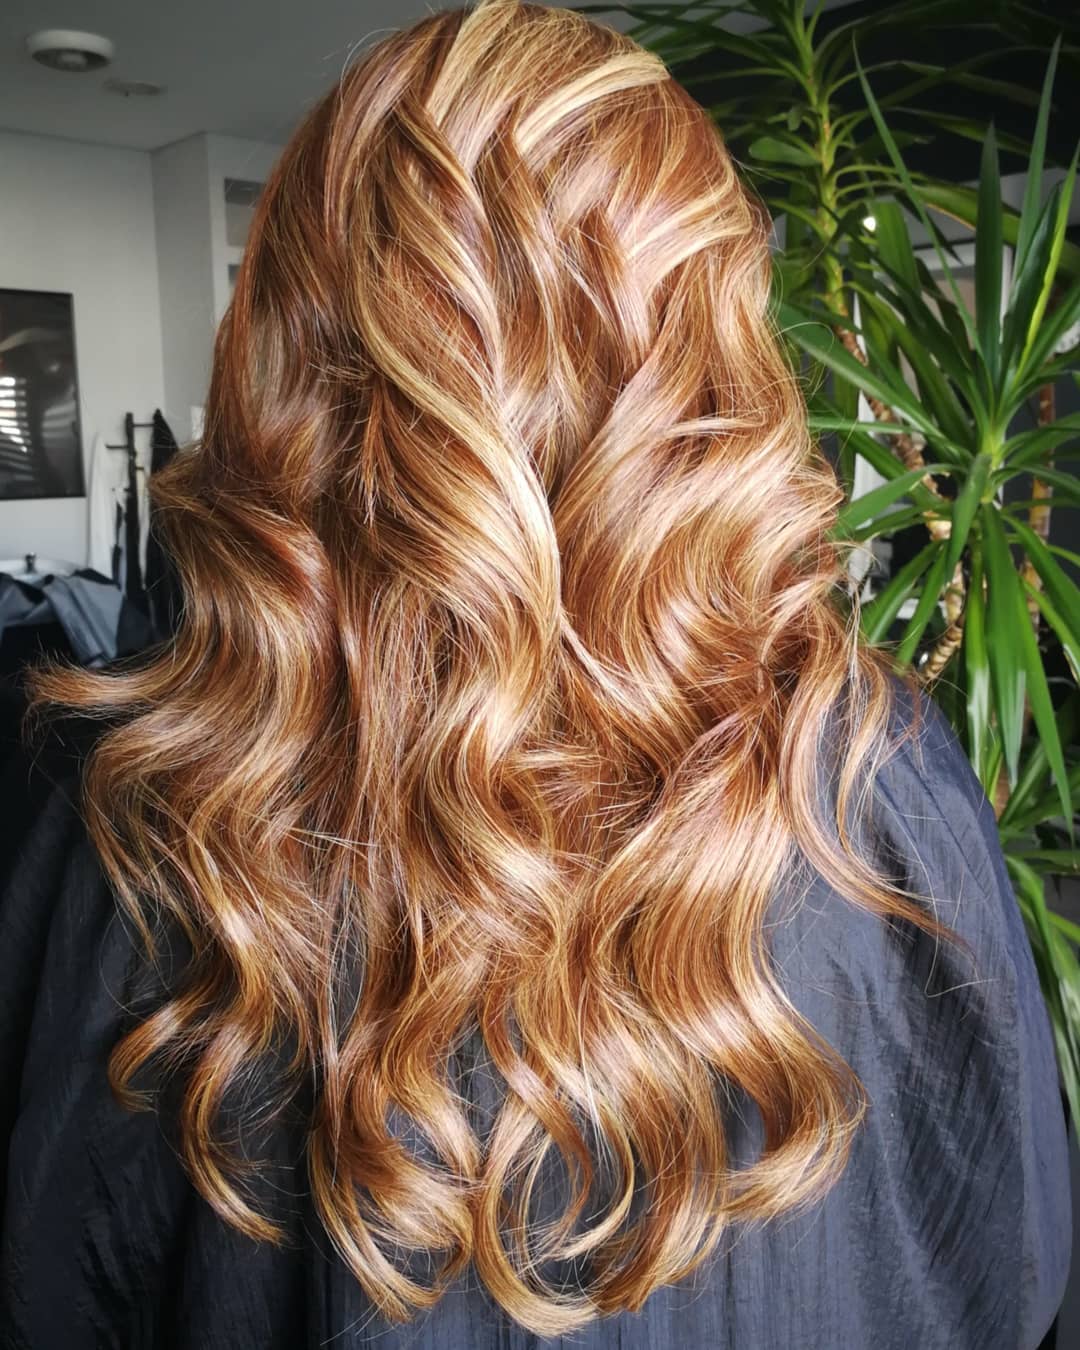 Red hair with blonde highlights